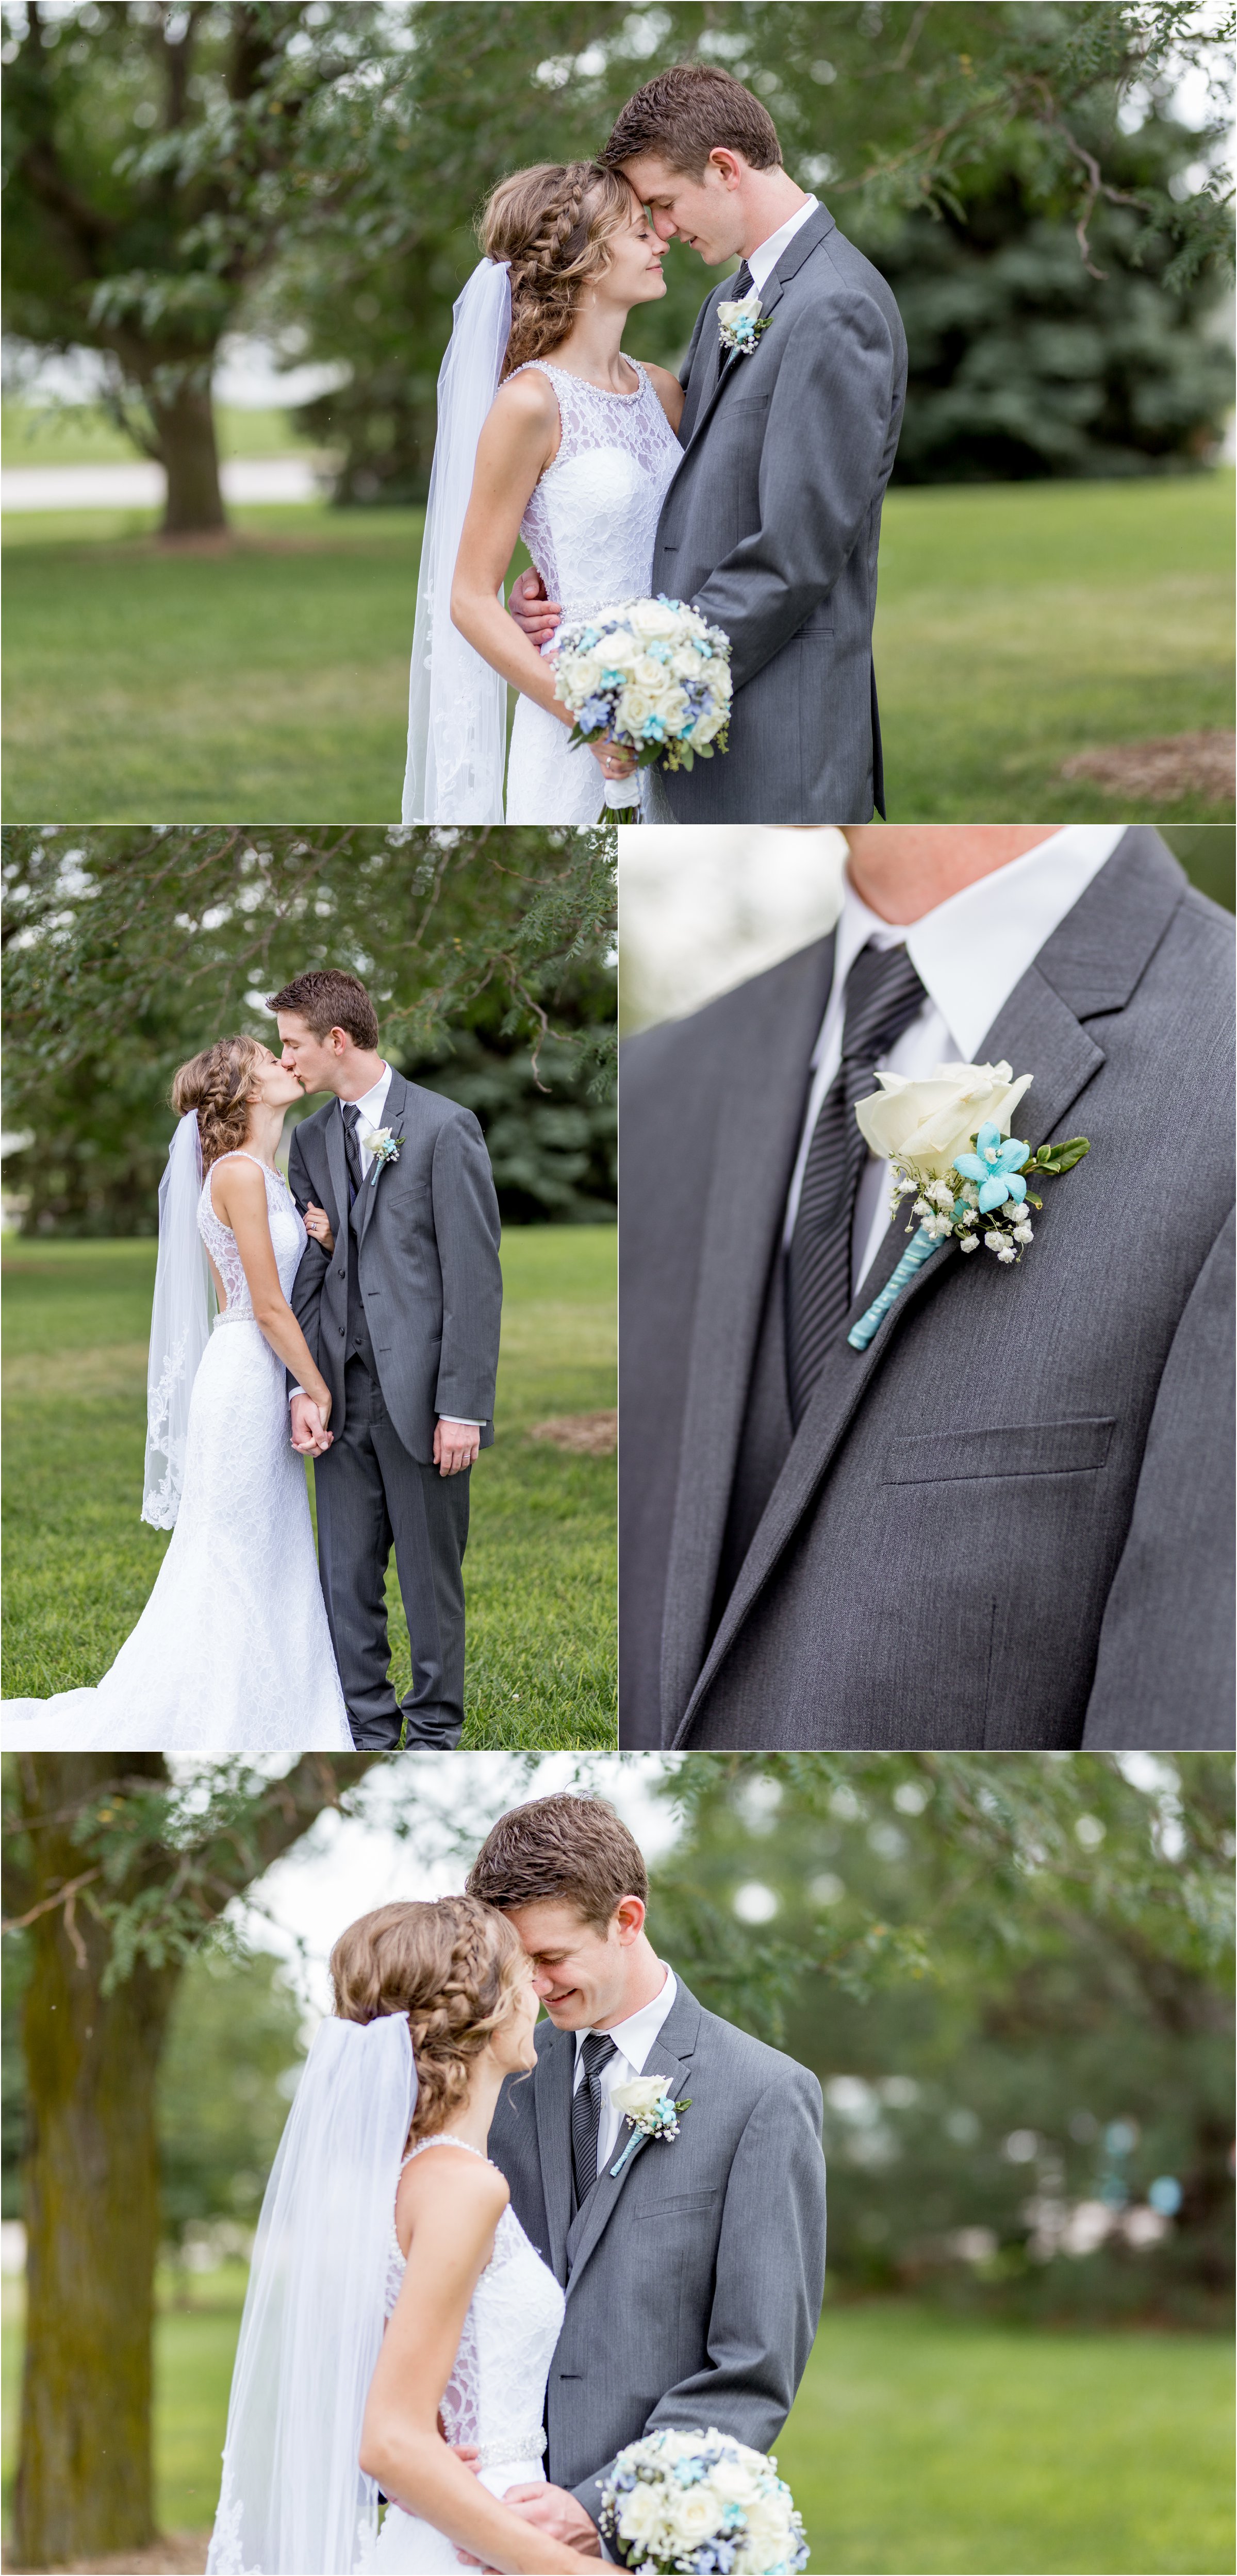 bride and groom stand face to face in front of trees in wedding attire with bouquet